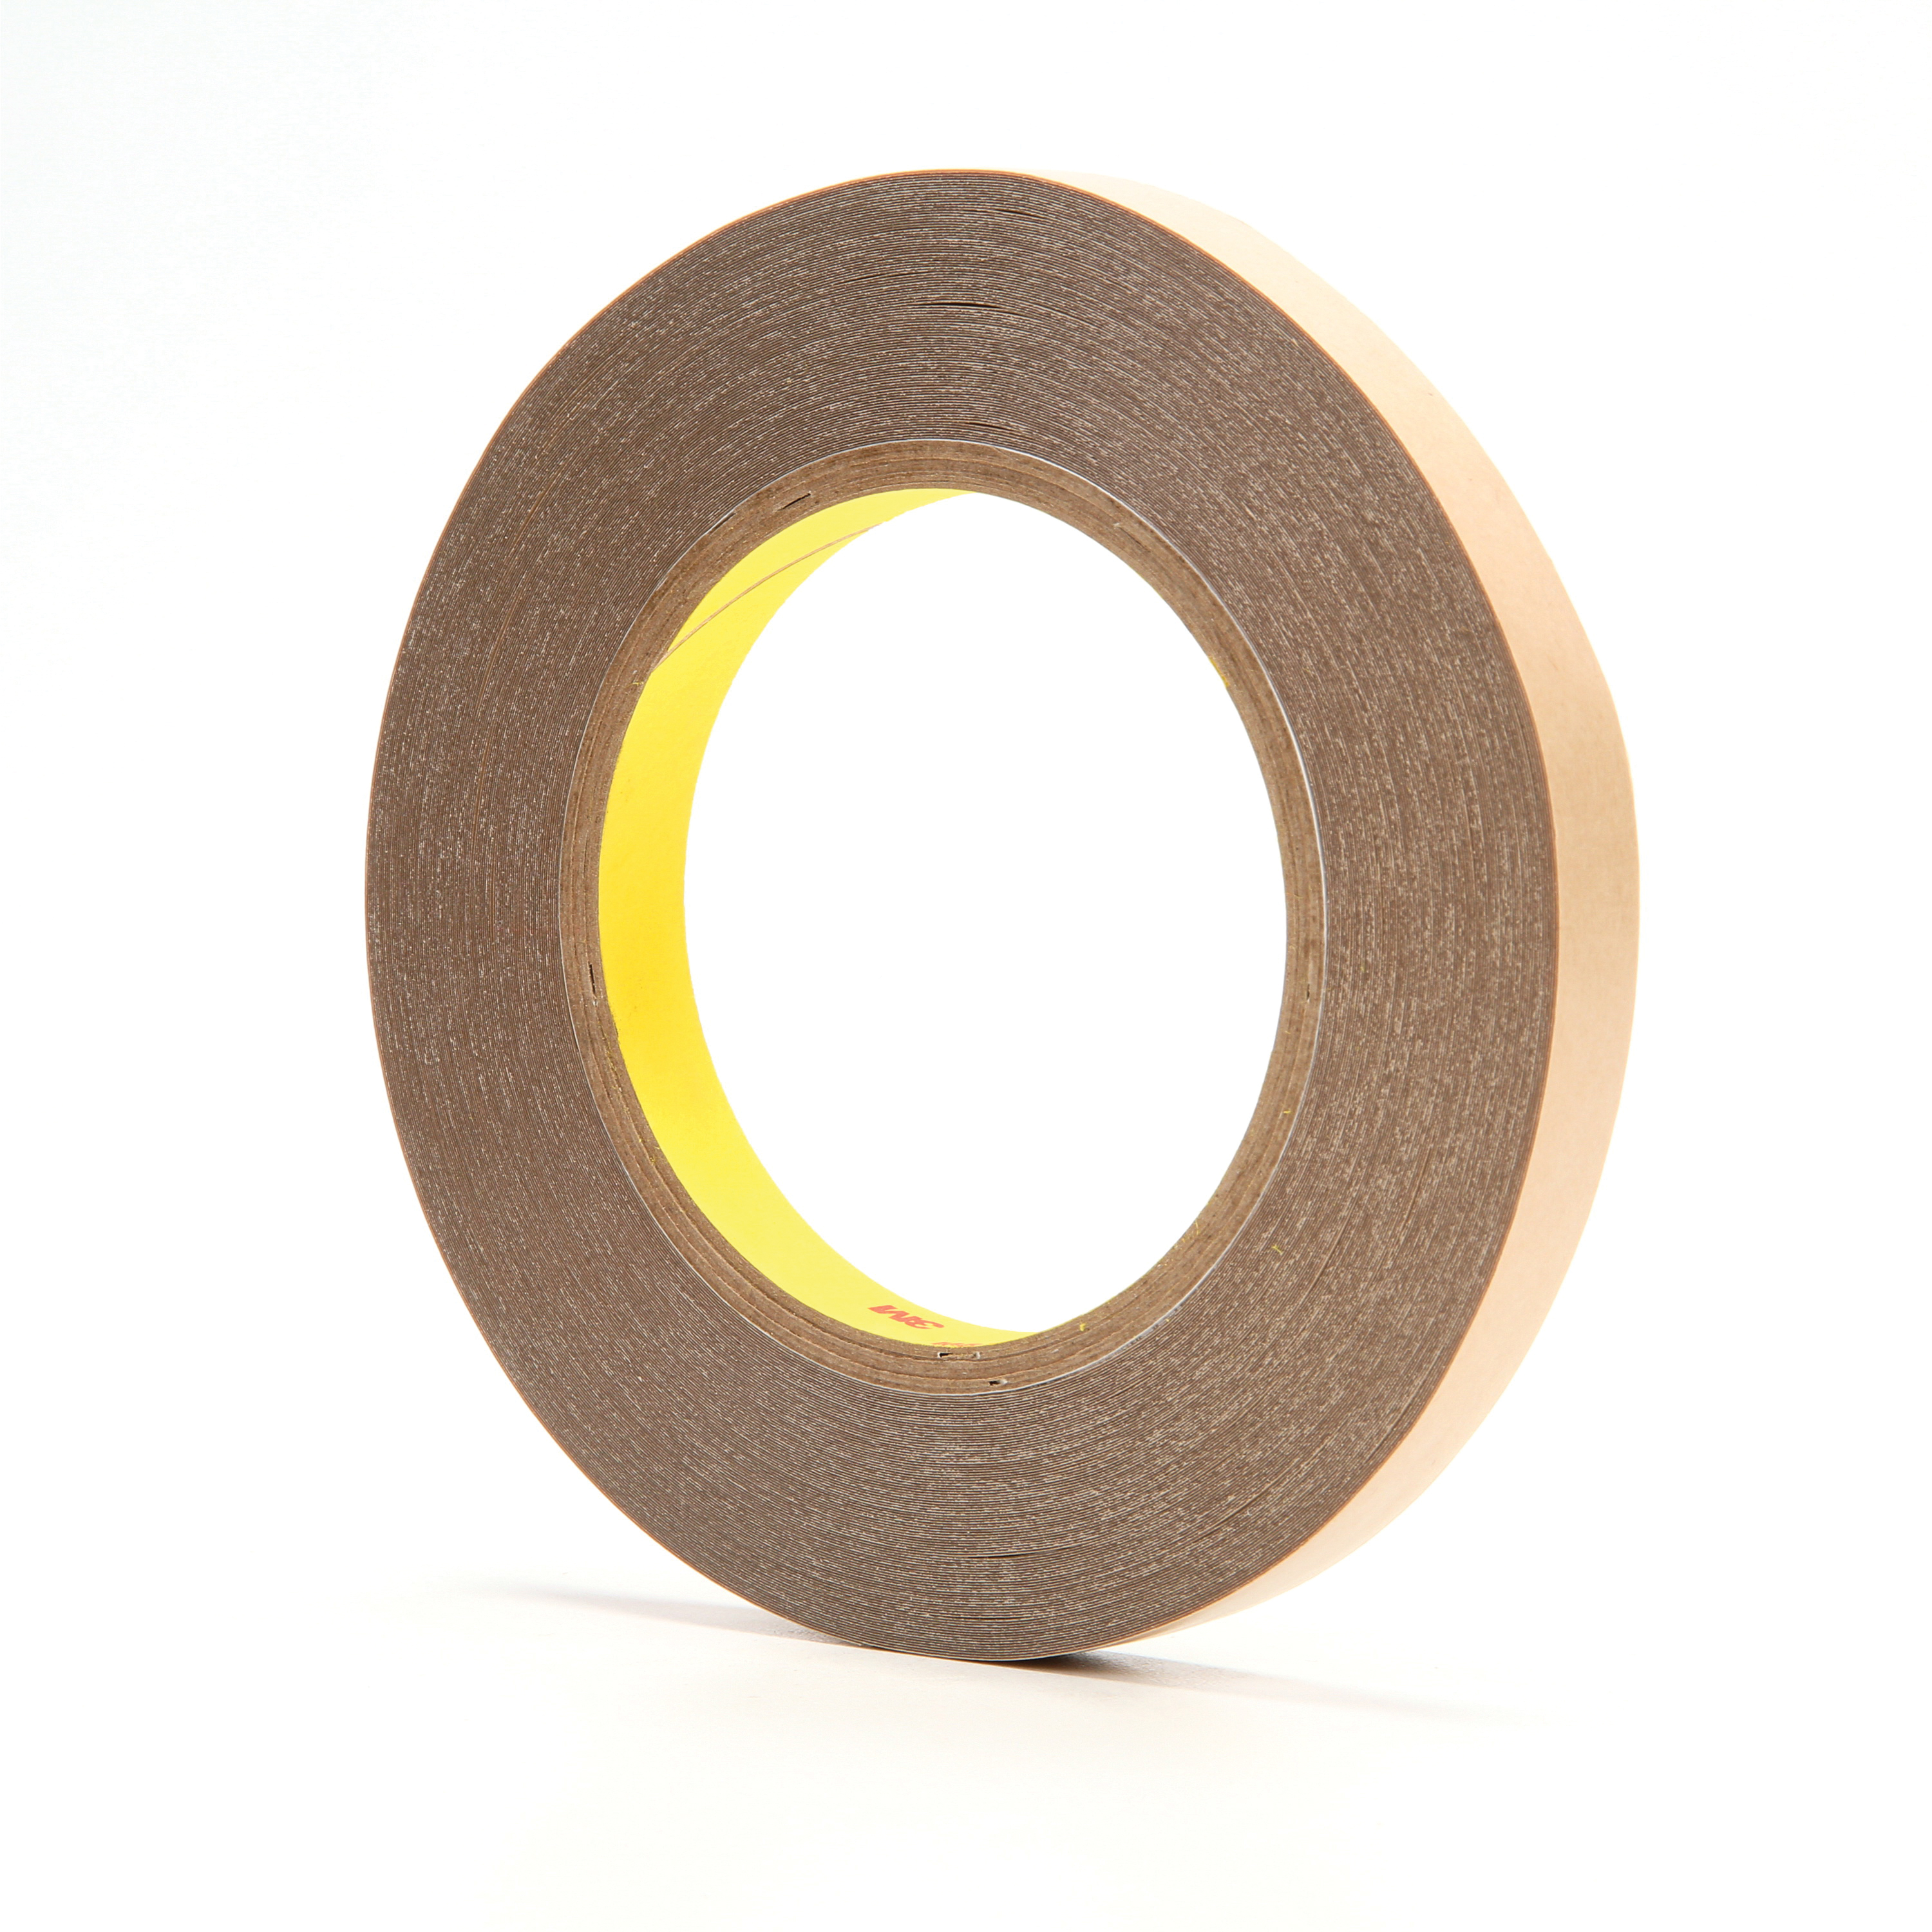 3M™ 021200-67795 Double Coated Tape, 36 yd L x 1/2 in W, 5.6 mil THK, 350 Acrylic Adhesive, Thin Polyester Backing, Clear